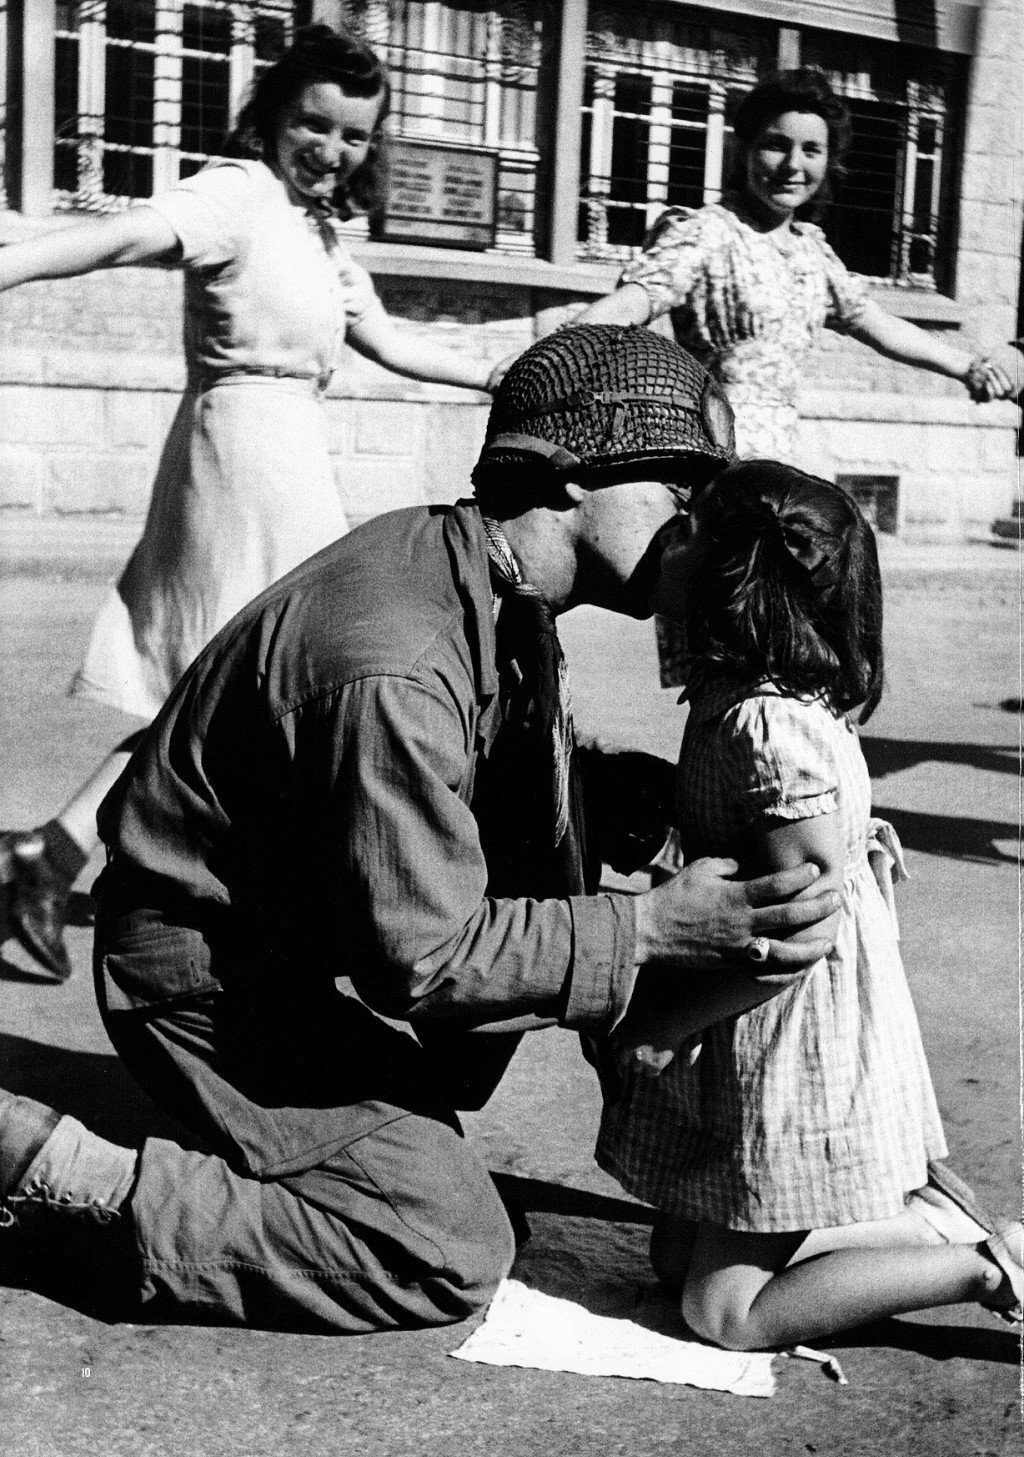 Tony Vaccaro - Kiss of liberation, Sergeant Gene Costanzo kneels to kiss a little girl during spontaneous celebrations in the main square of the town of St Briac, France 1944